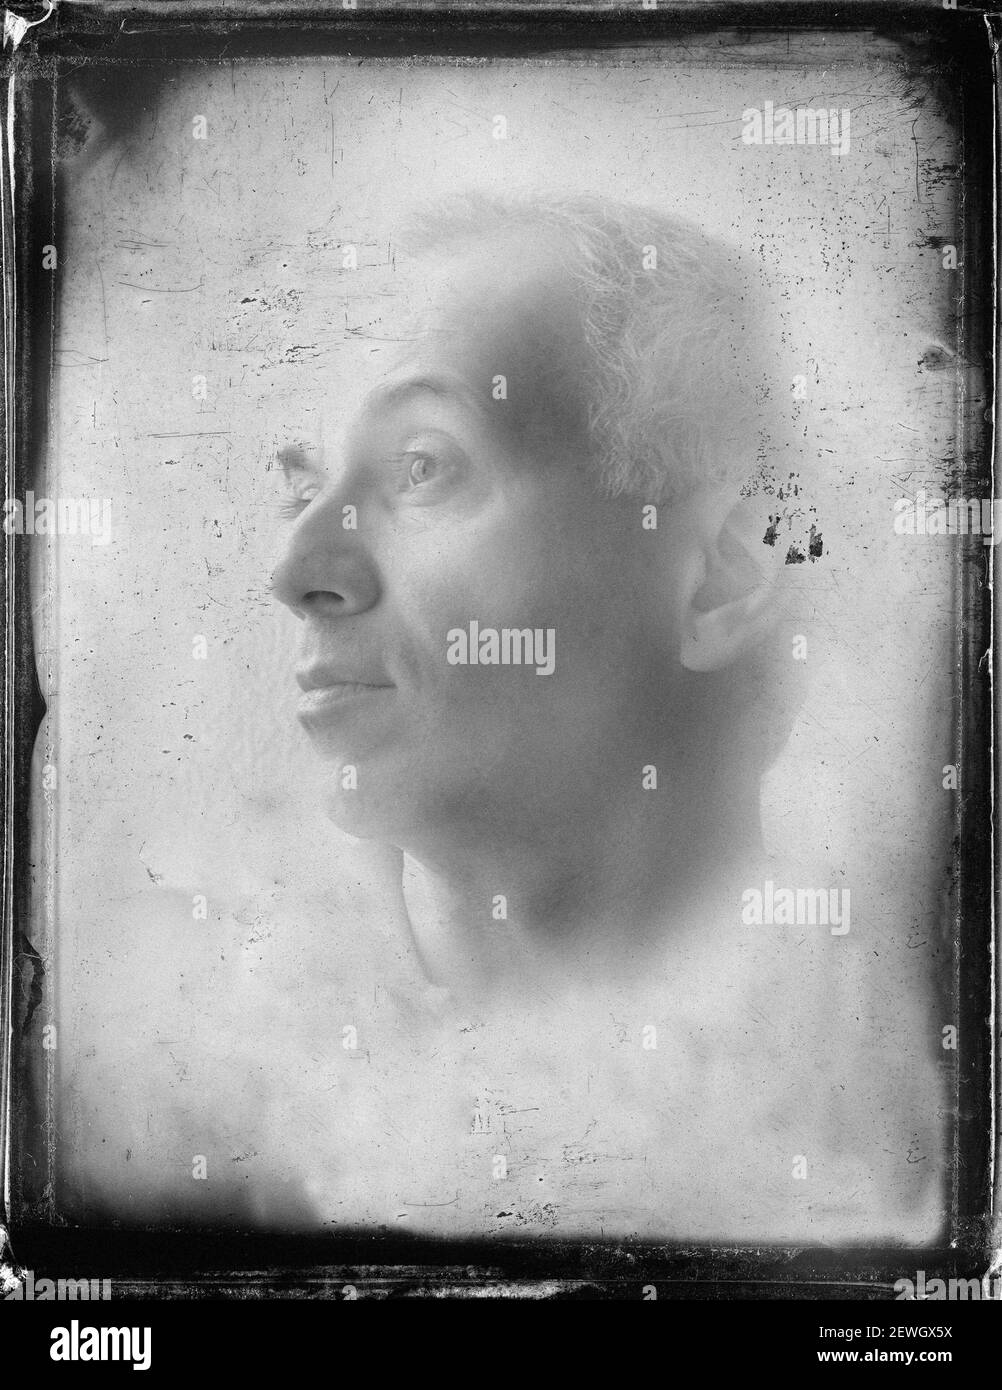 imitation of the portrait of a man on a wet plate Stock Photo